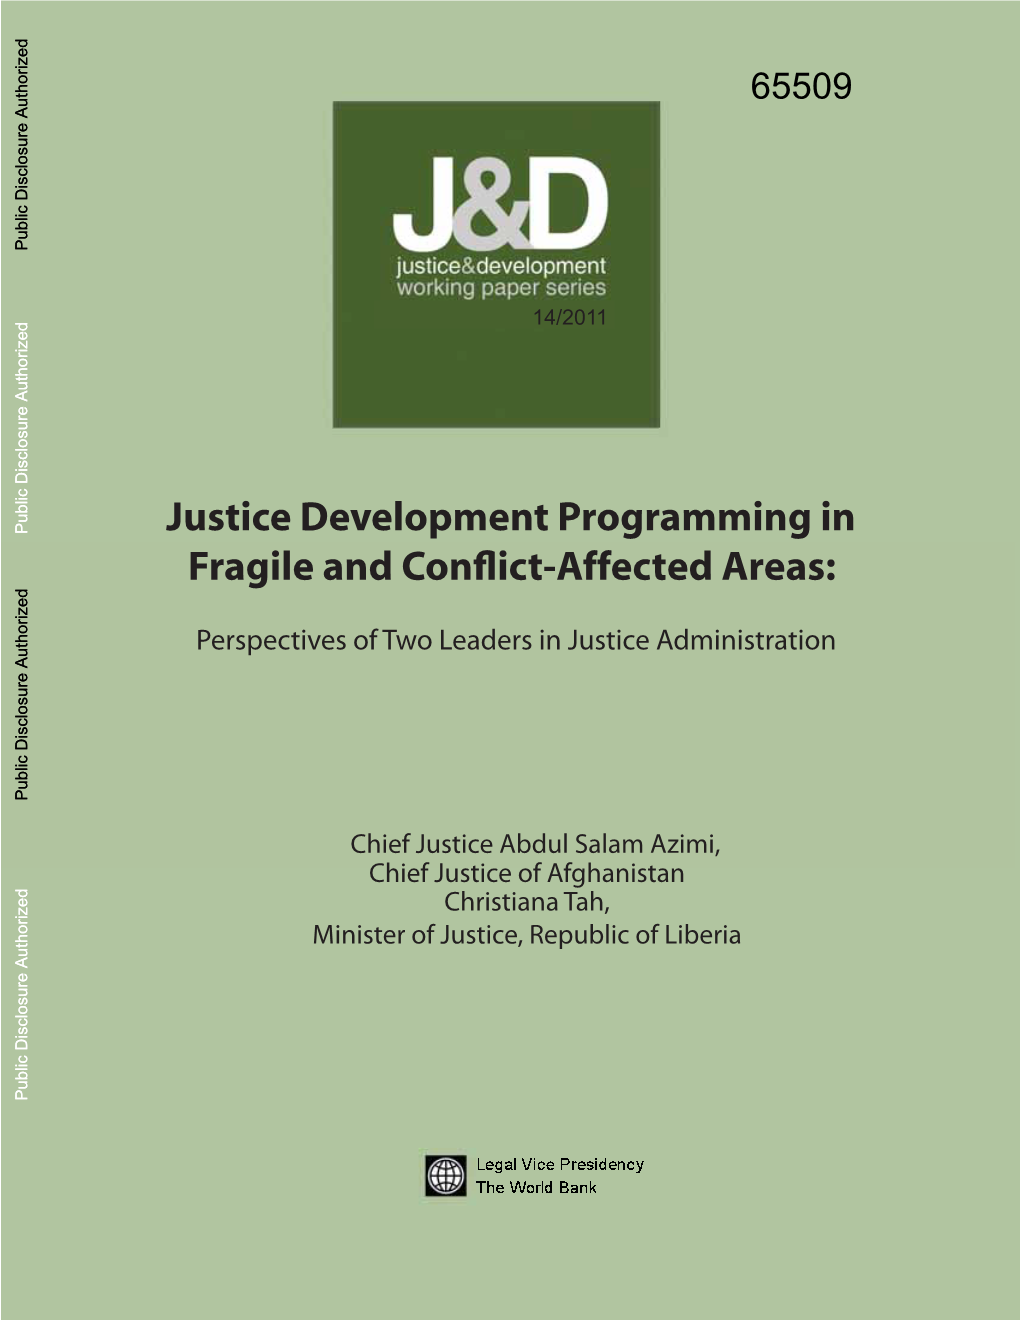 Justice Development Programming in Fragile and Conflict Affected Areas